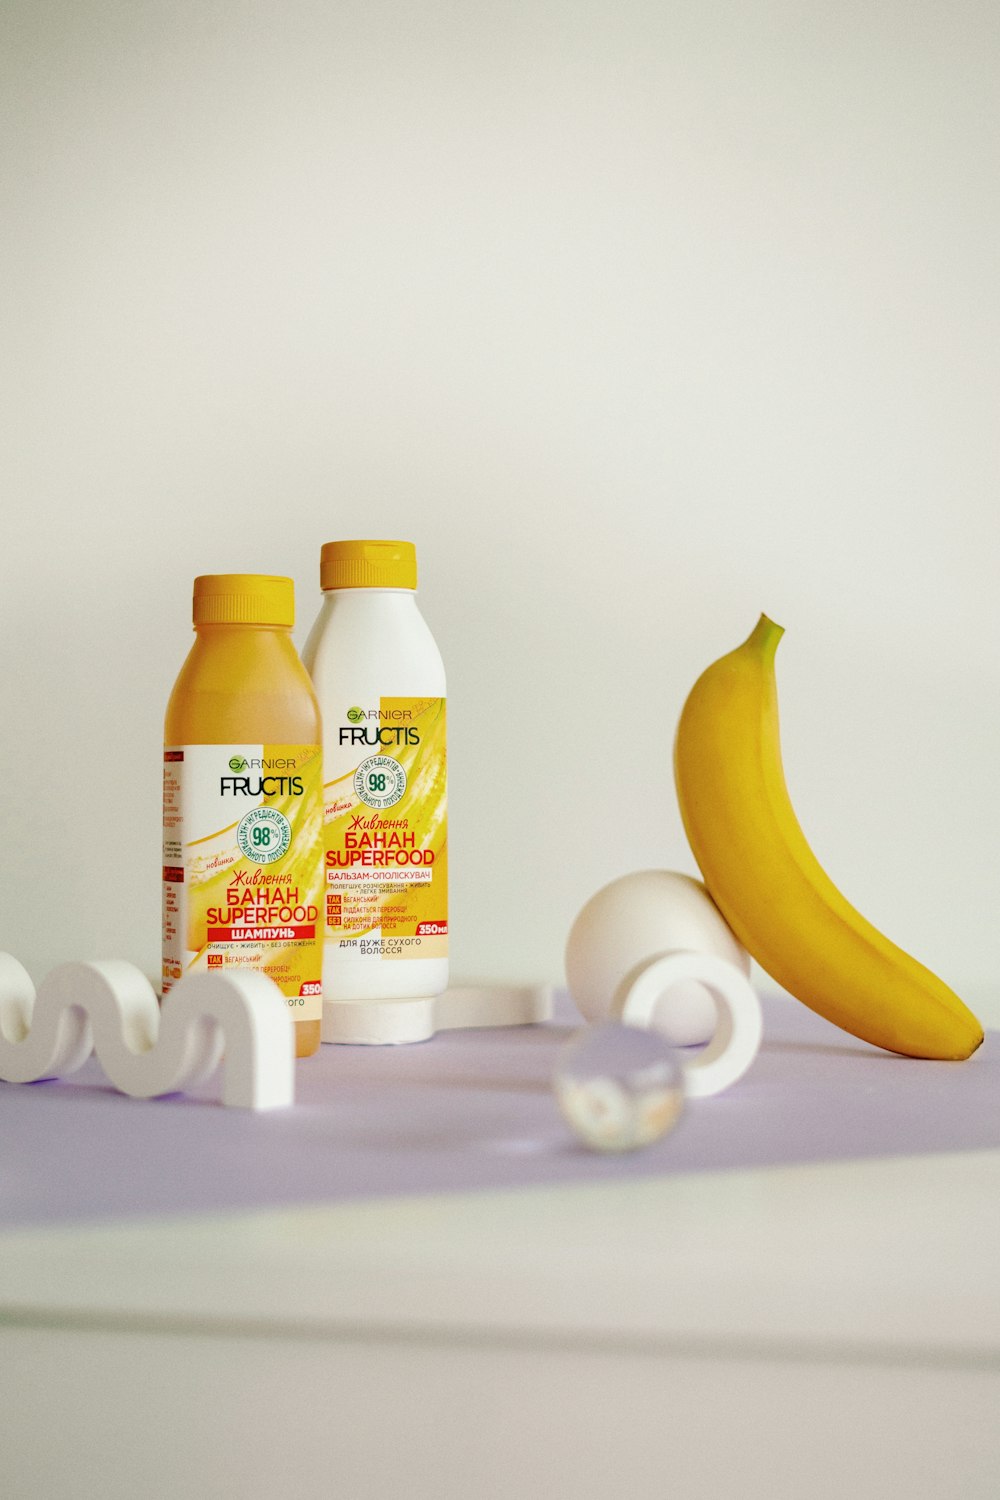 a banana and two bottles of juice on a table